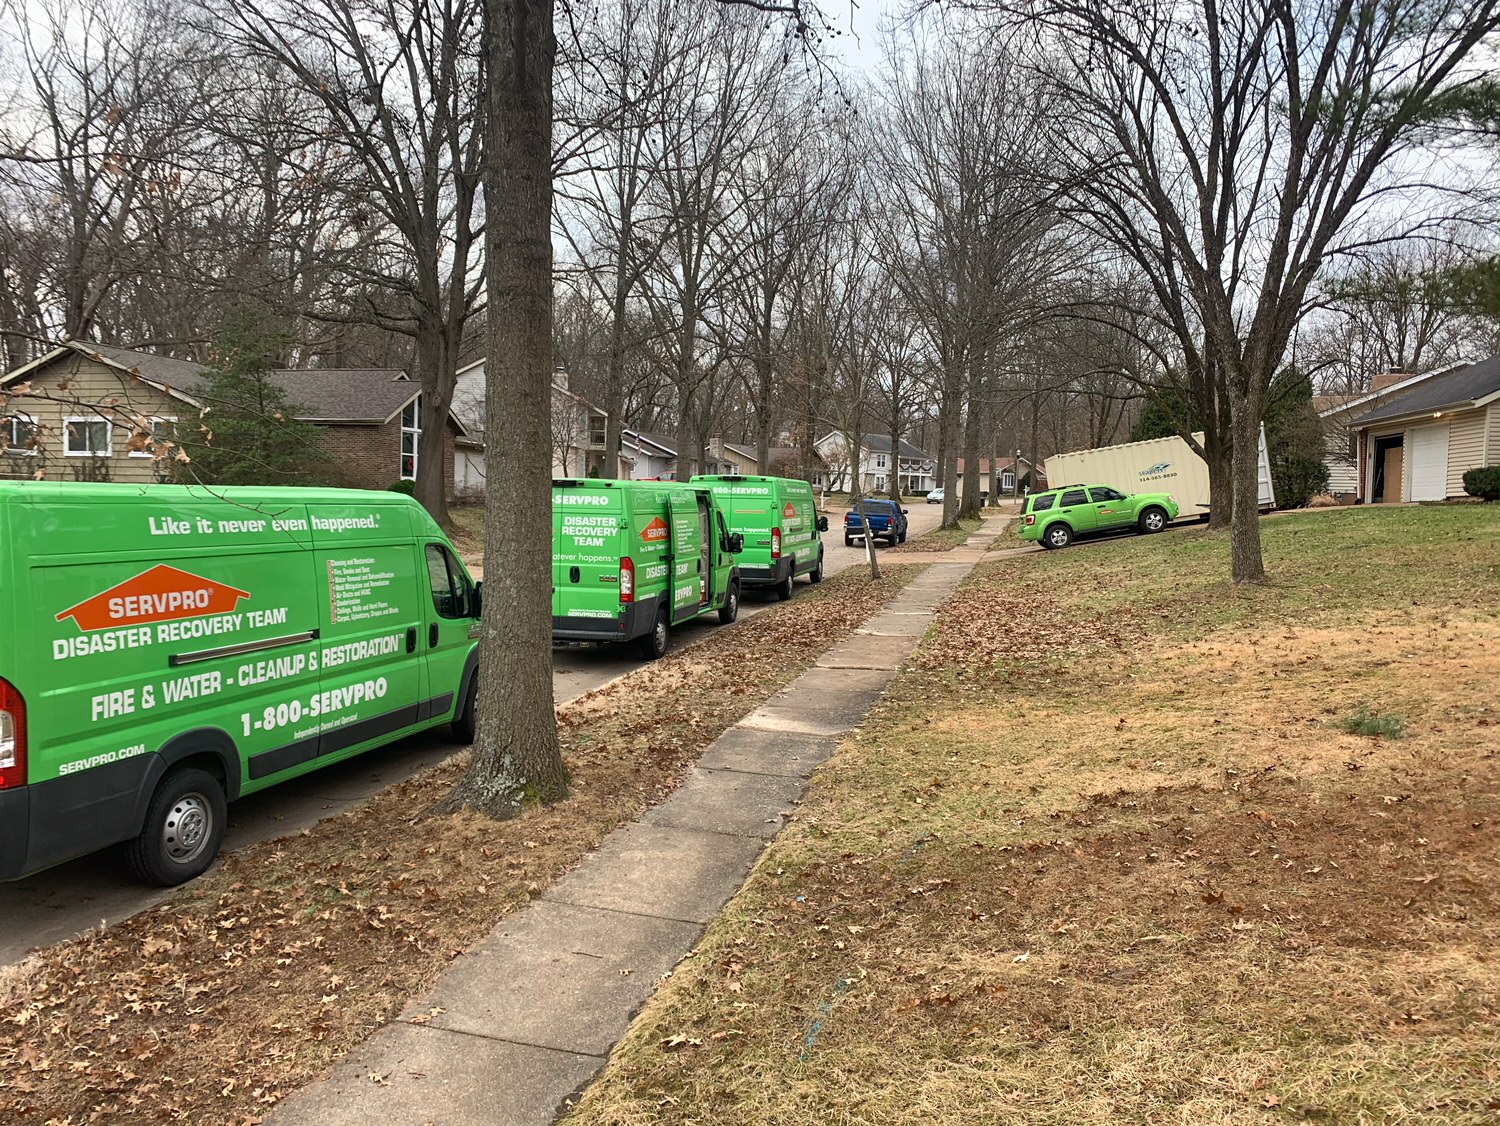 No matter the damage, no matter the size, our local SERVPRO team is here for you! From commercial water damage to house fires and mold, we are #HereToHelp! ✅